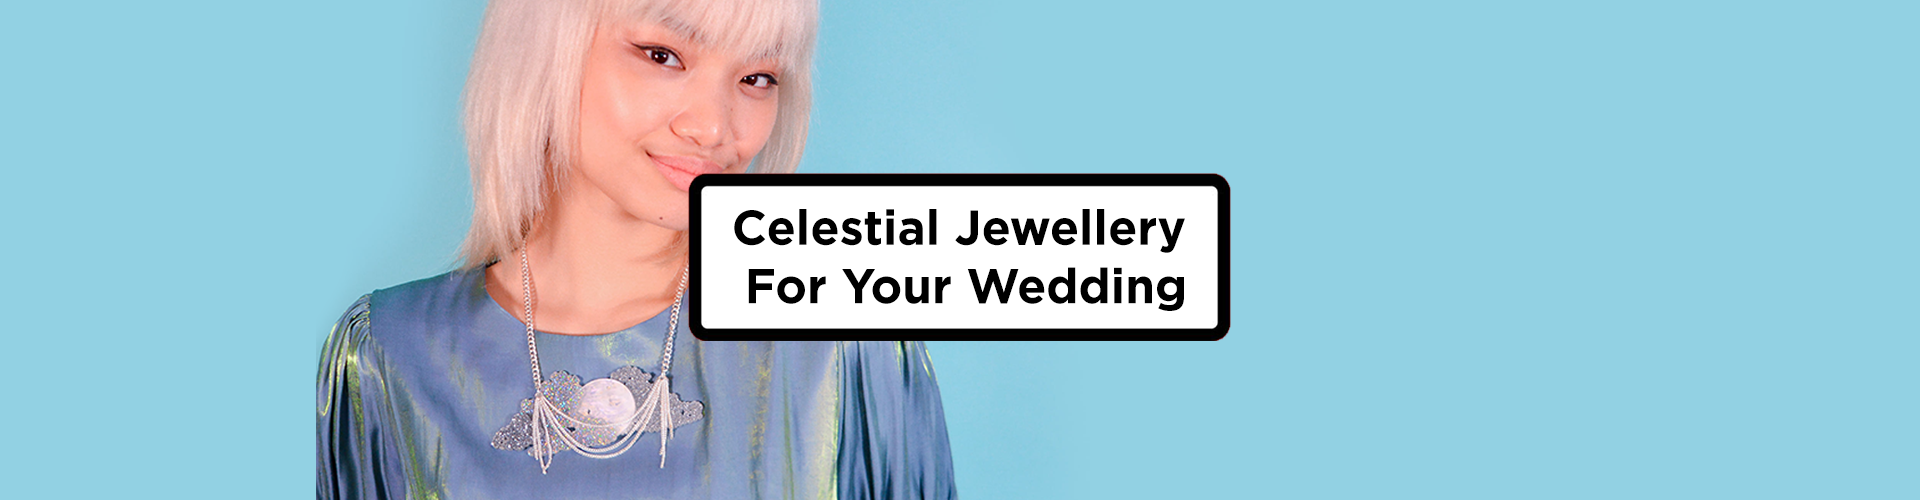 Celestial Jewellery For Your Wedding